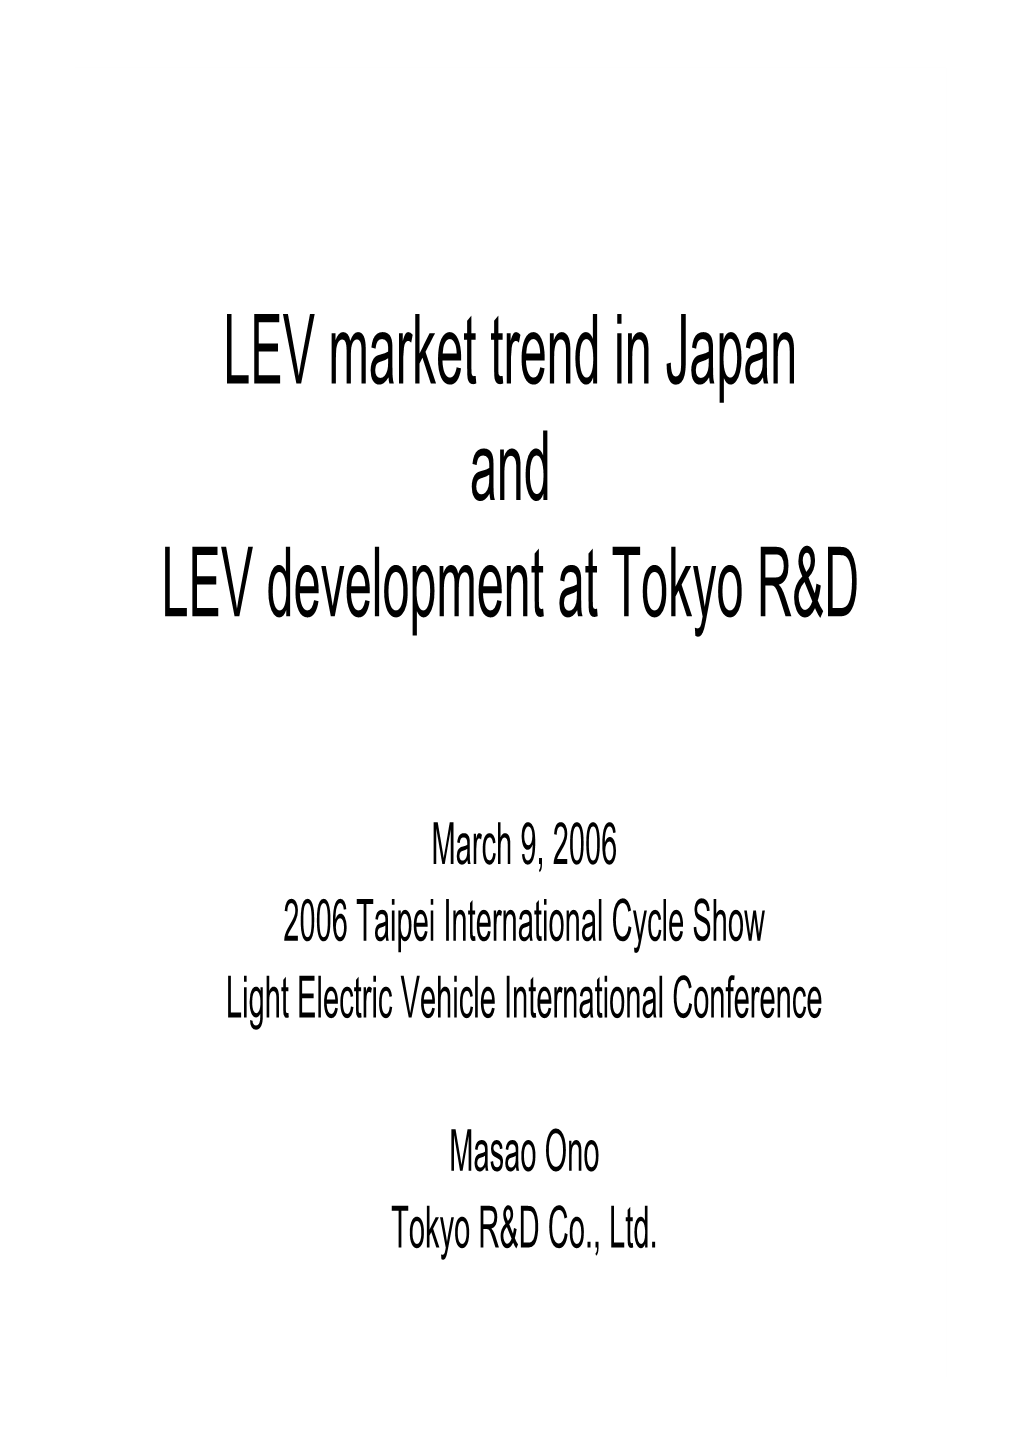 LEV Market Trend in Japan and LEV Development at Tokyo R&D